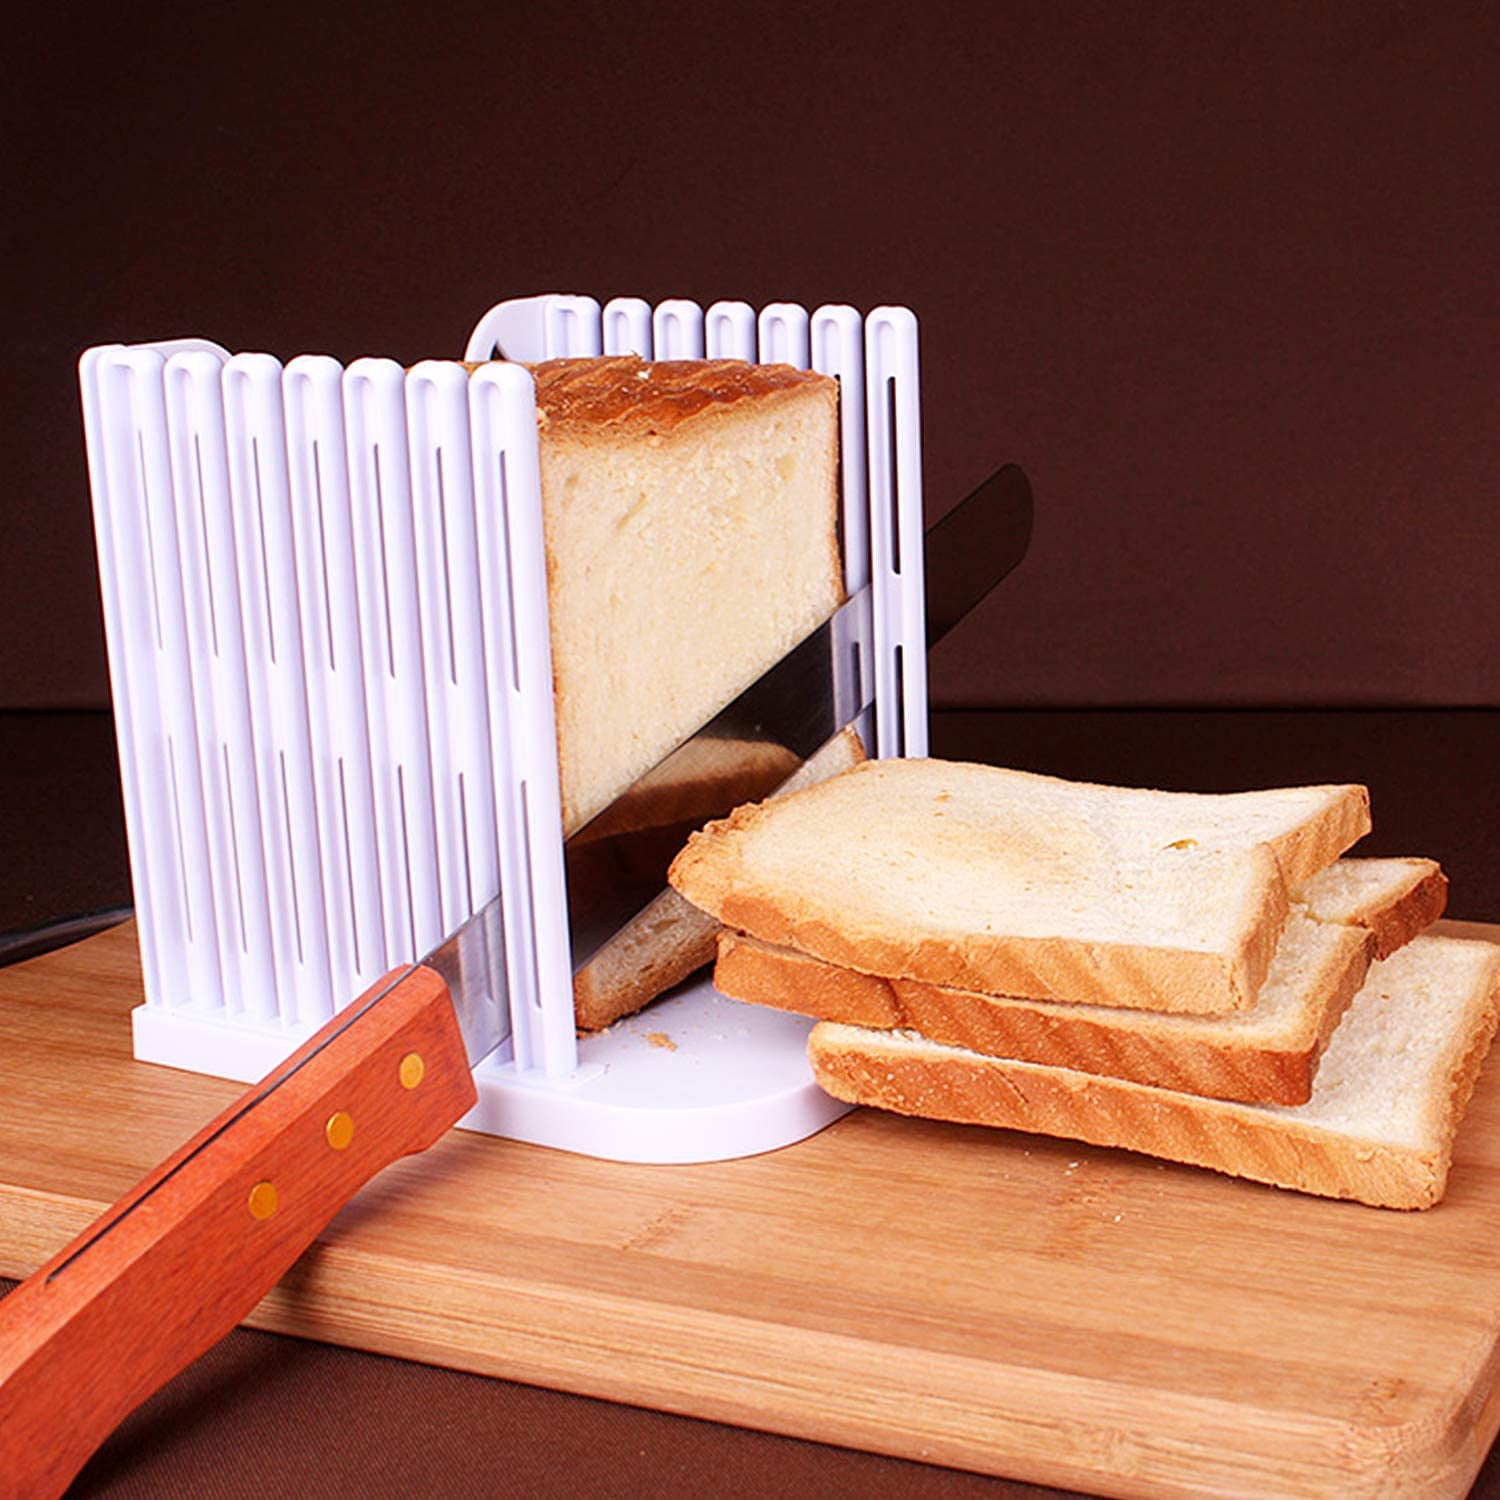 Bread Slicer Guide, Adjustable Foldable Cutting Board for Homemade Bread,  Cake, Sandwich, Toast, Loaf, and Bagel - Compact Cutter Mold for Thin or  Thick Slices, Adjustable Foldable Bread Slicer Guide Cutting Board